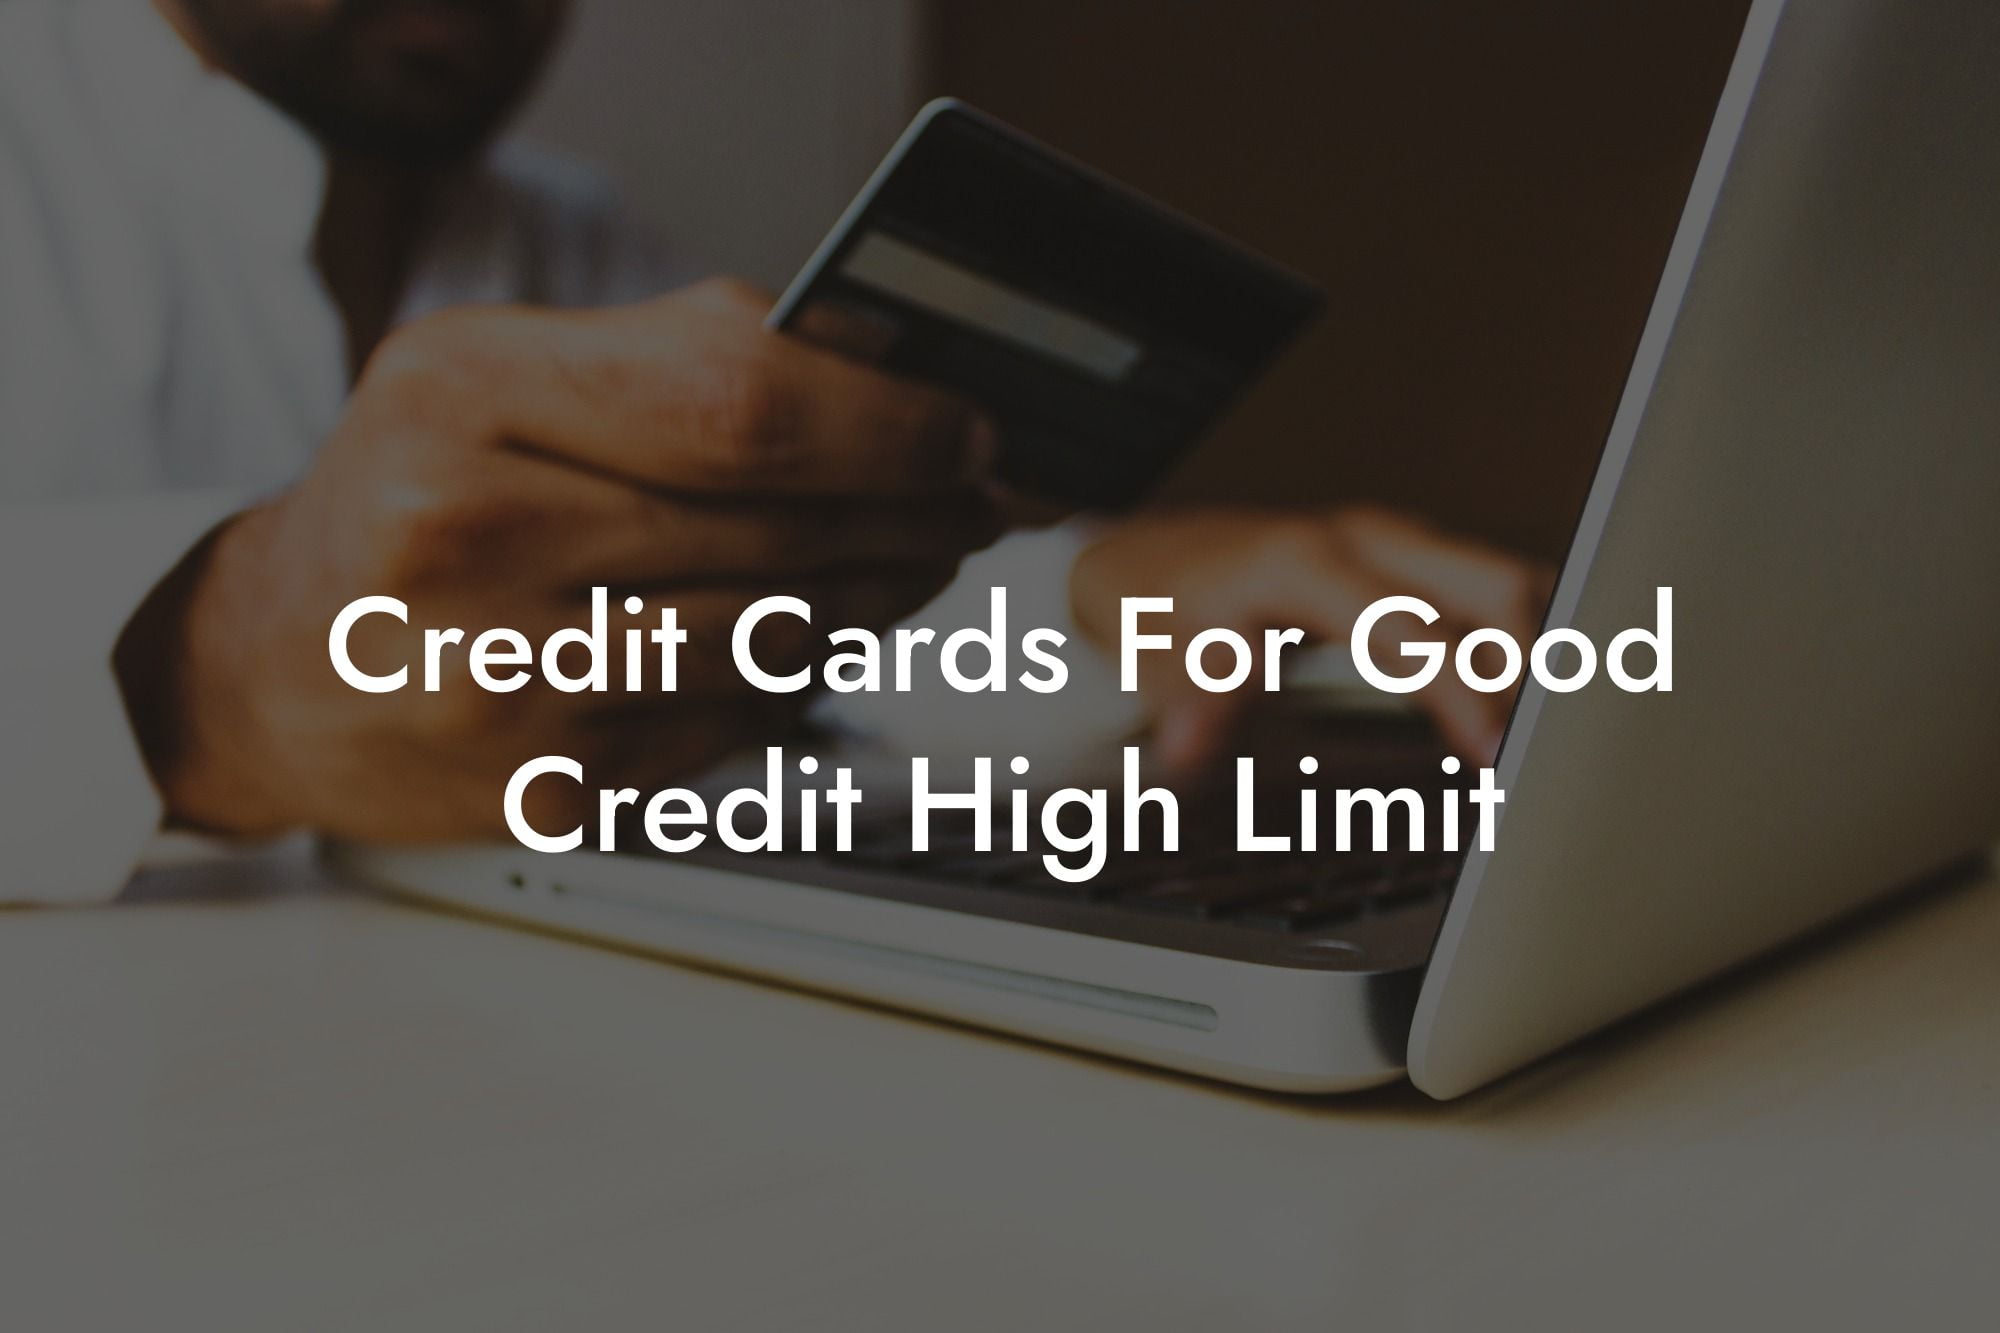 Credit Cards For Good Credit High Limit